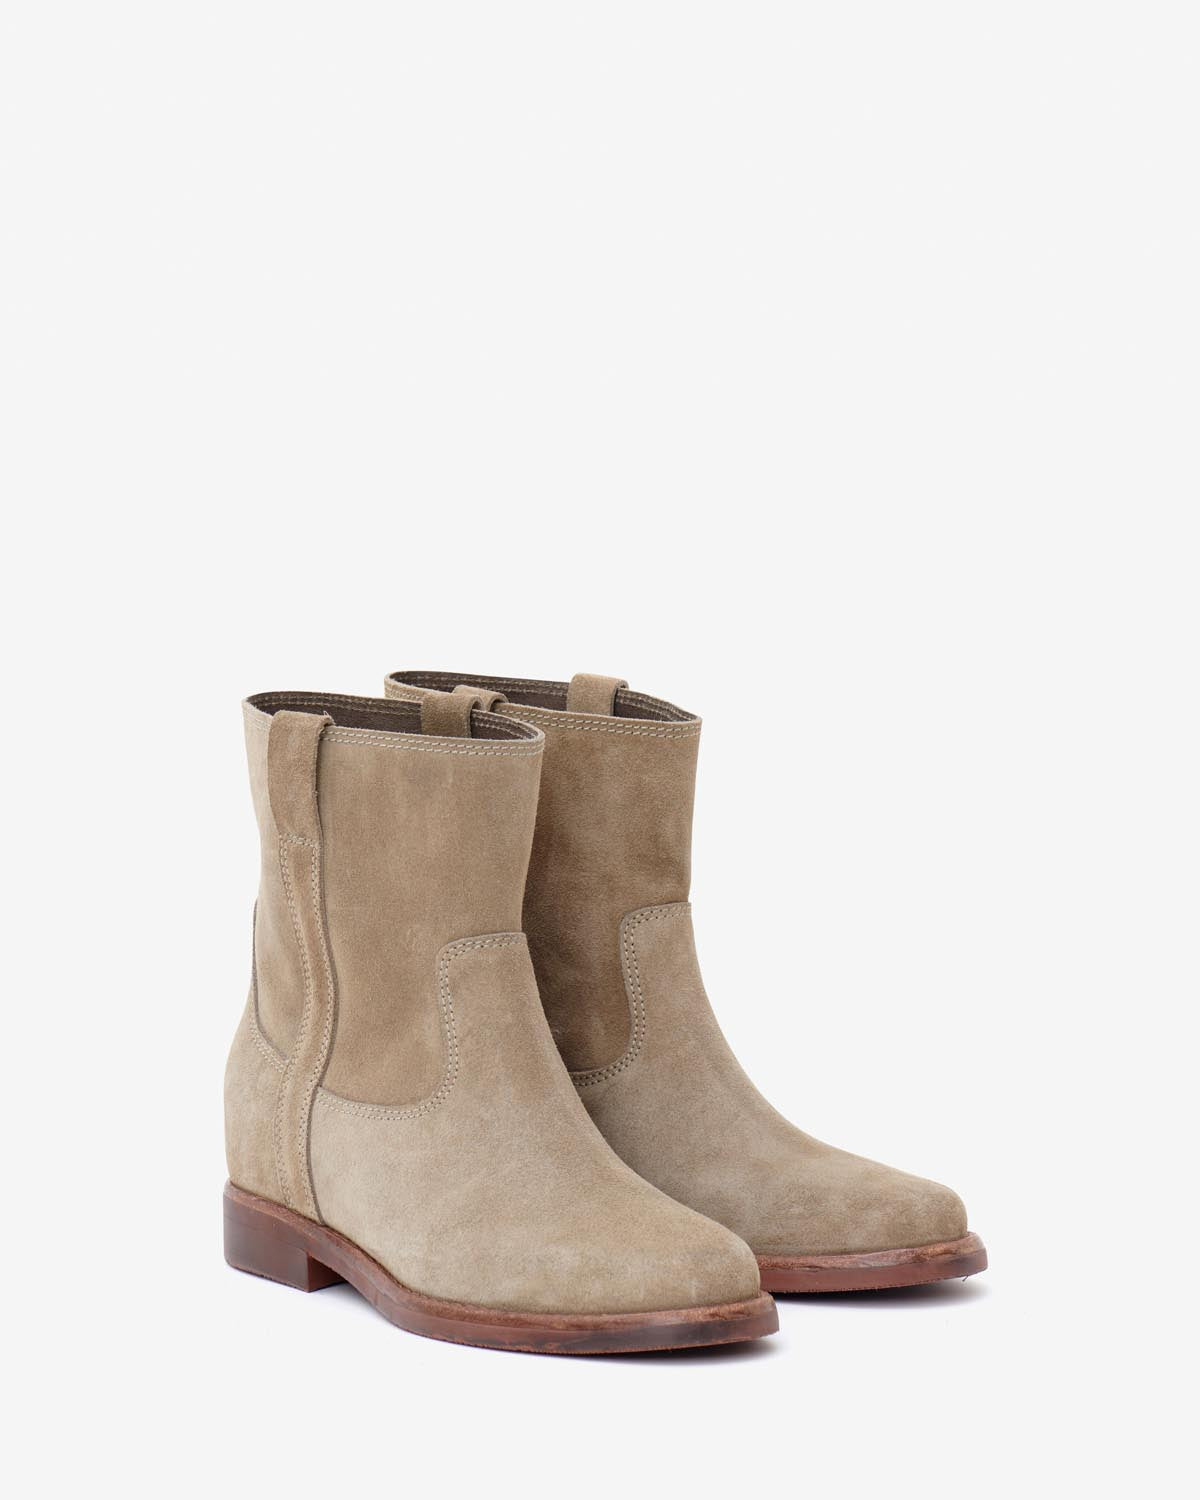 Boots susee Woman Taupe 4